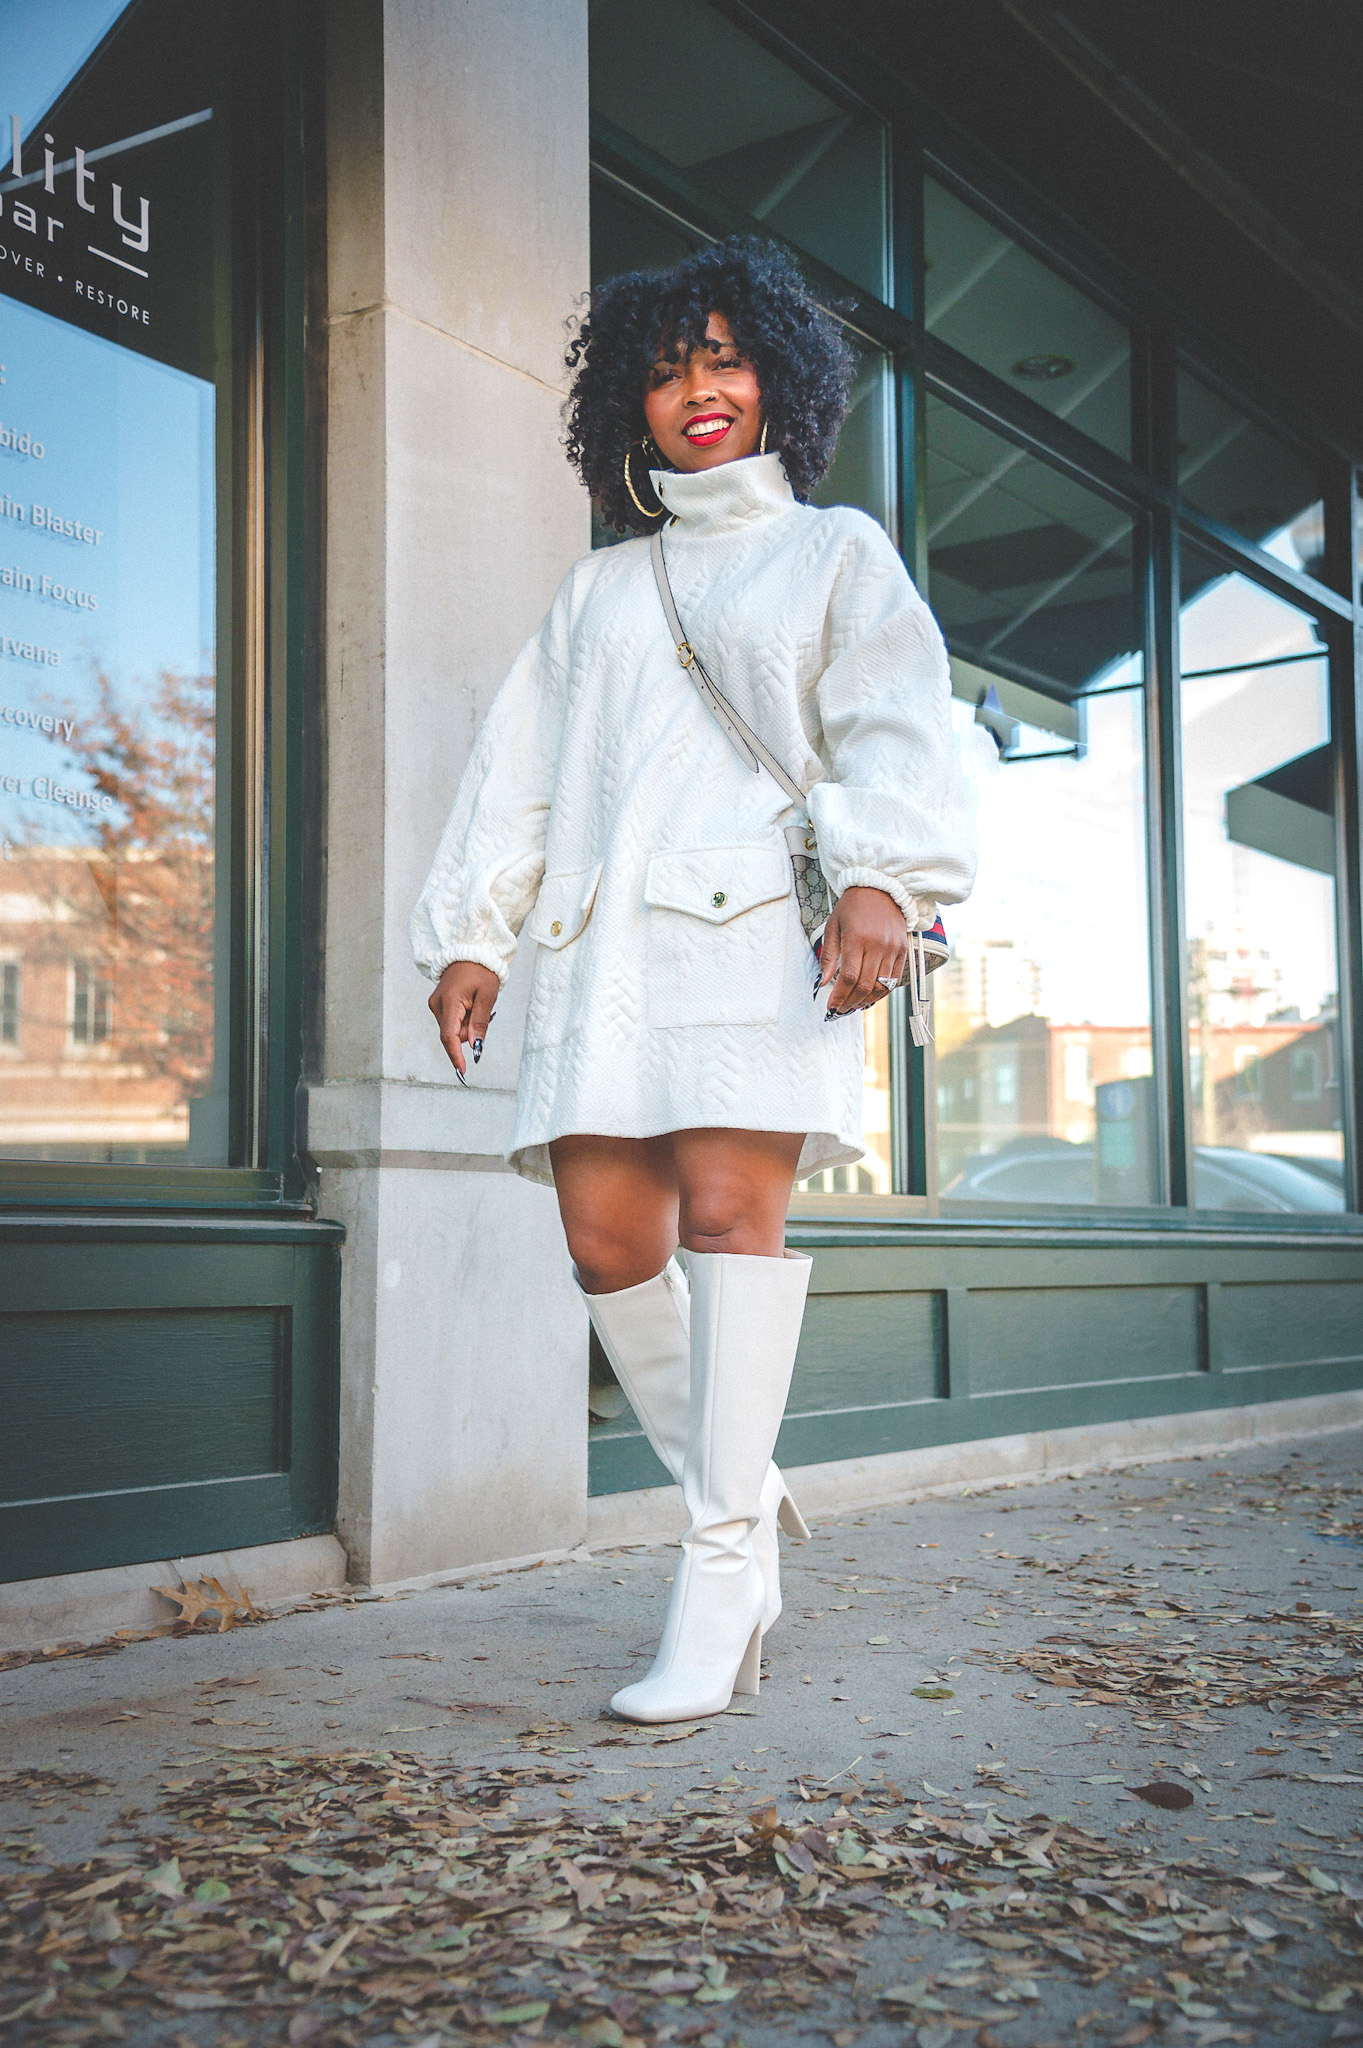 SWEENEE STYLE, HOLIDAY OUTFIT IDEAS, OUTFITS TO WEAR EVERYDAY, HOW TO WEAR A CREAM DRESS, THANKSGIVING DRESS, CREAM DRESS, INDIANAPOLIS FASHION BLOG, INDIANA STYLE BLOG, BLACK GIRLS WHO BLOG